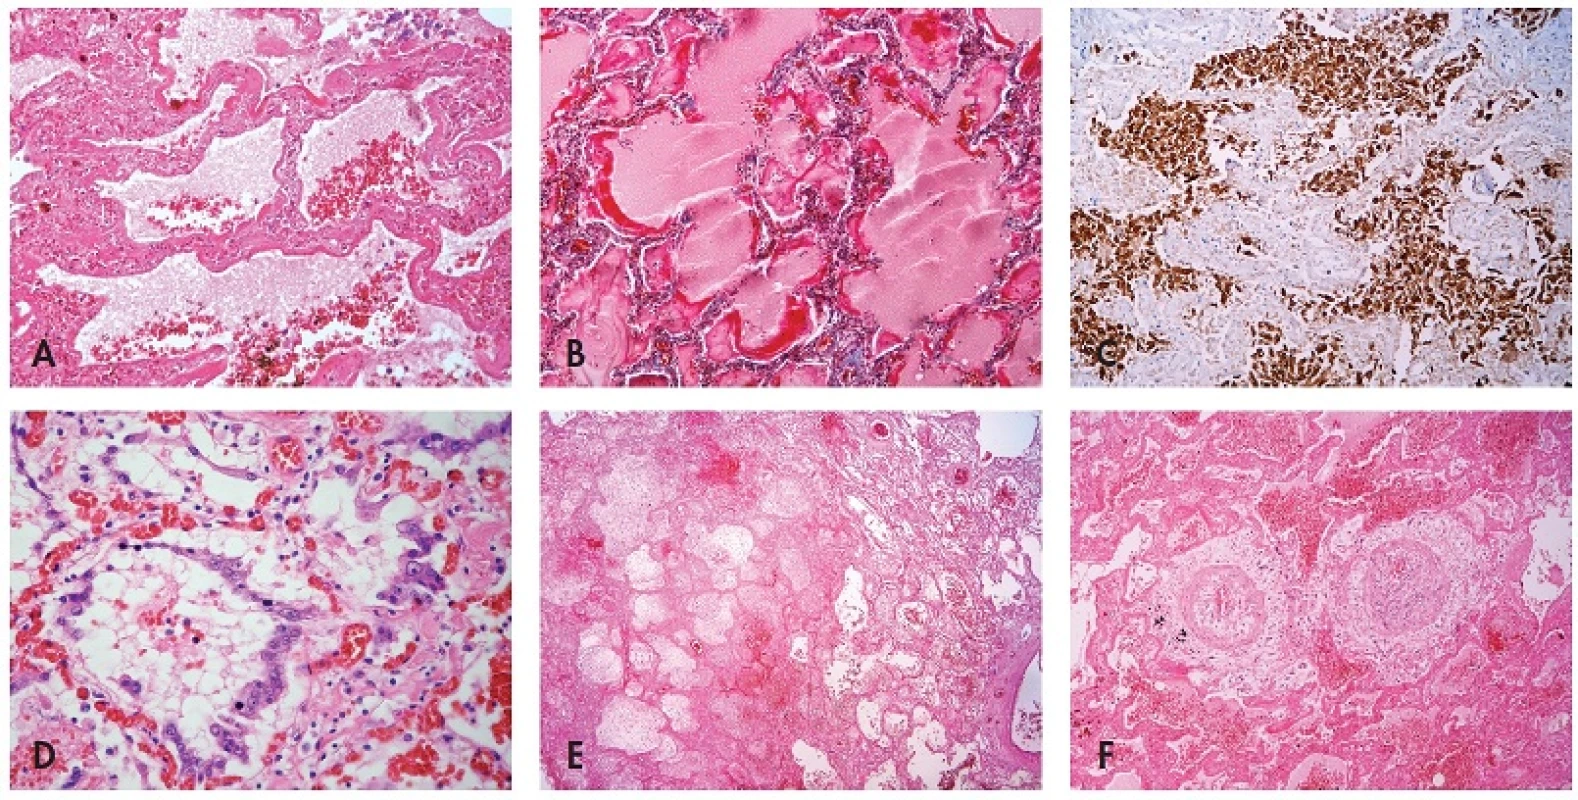 Histological findings associated with influenza A (H1N1) pneumonia: (A) intraalveolar edema with haemorrhages, hyaline membranes lining alveolar spaces, HE, 100x, (B) highlighted hyaline membranes in Masson’s trichrome, 100x, (C) expression of pancytokeratin AE1/AE3 in desquamated pneumocytes, immunohistochemistry, 100x, (D) cytopathic changes of pneumocytes, HE, 200x, (E) necrosis, HE, 40x, (F) atypical acute vasculitis with nearly obturating intimal proliferation, HE, 100x.